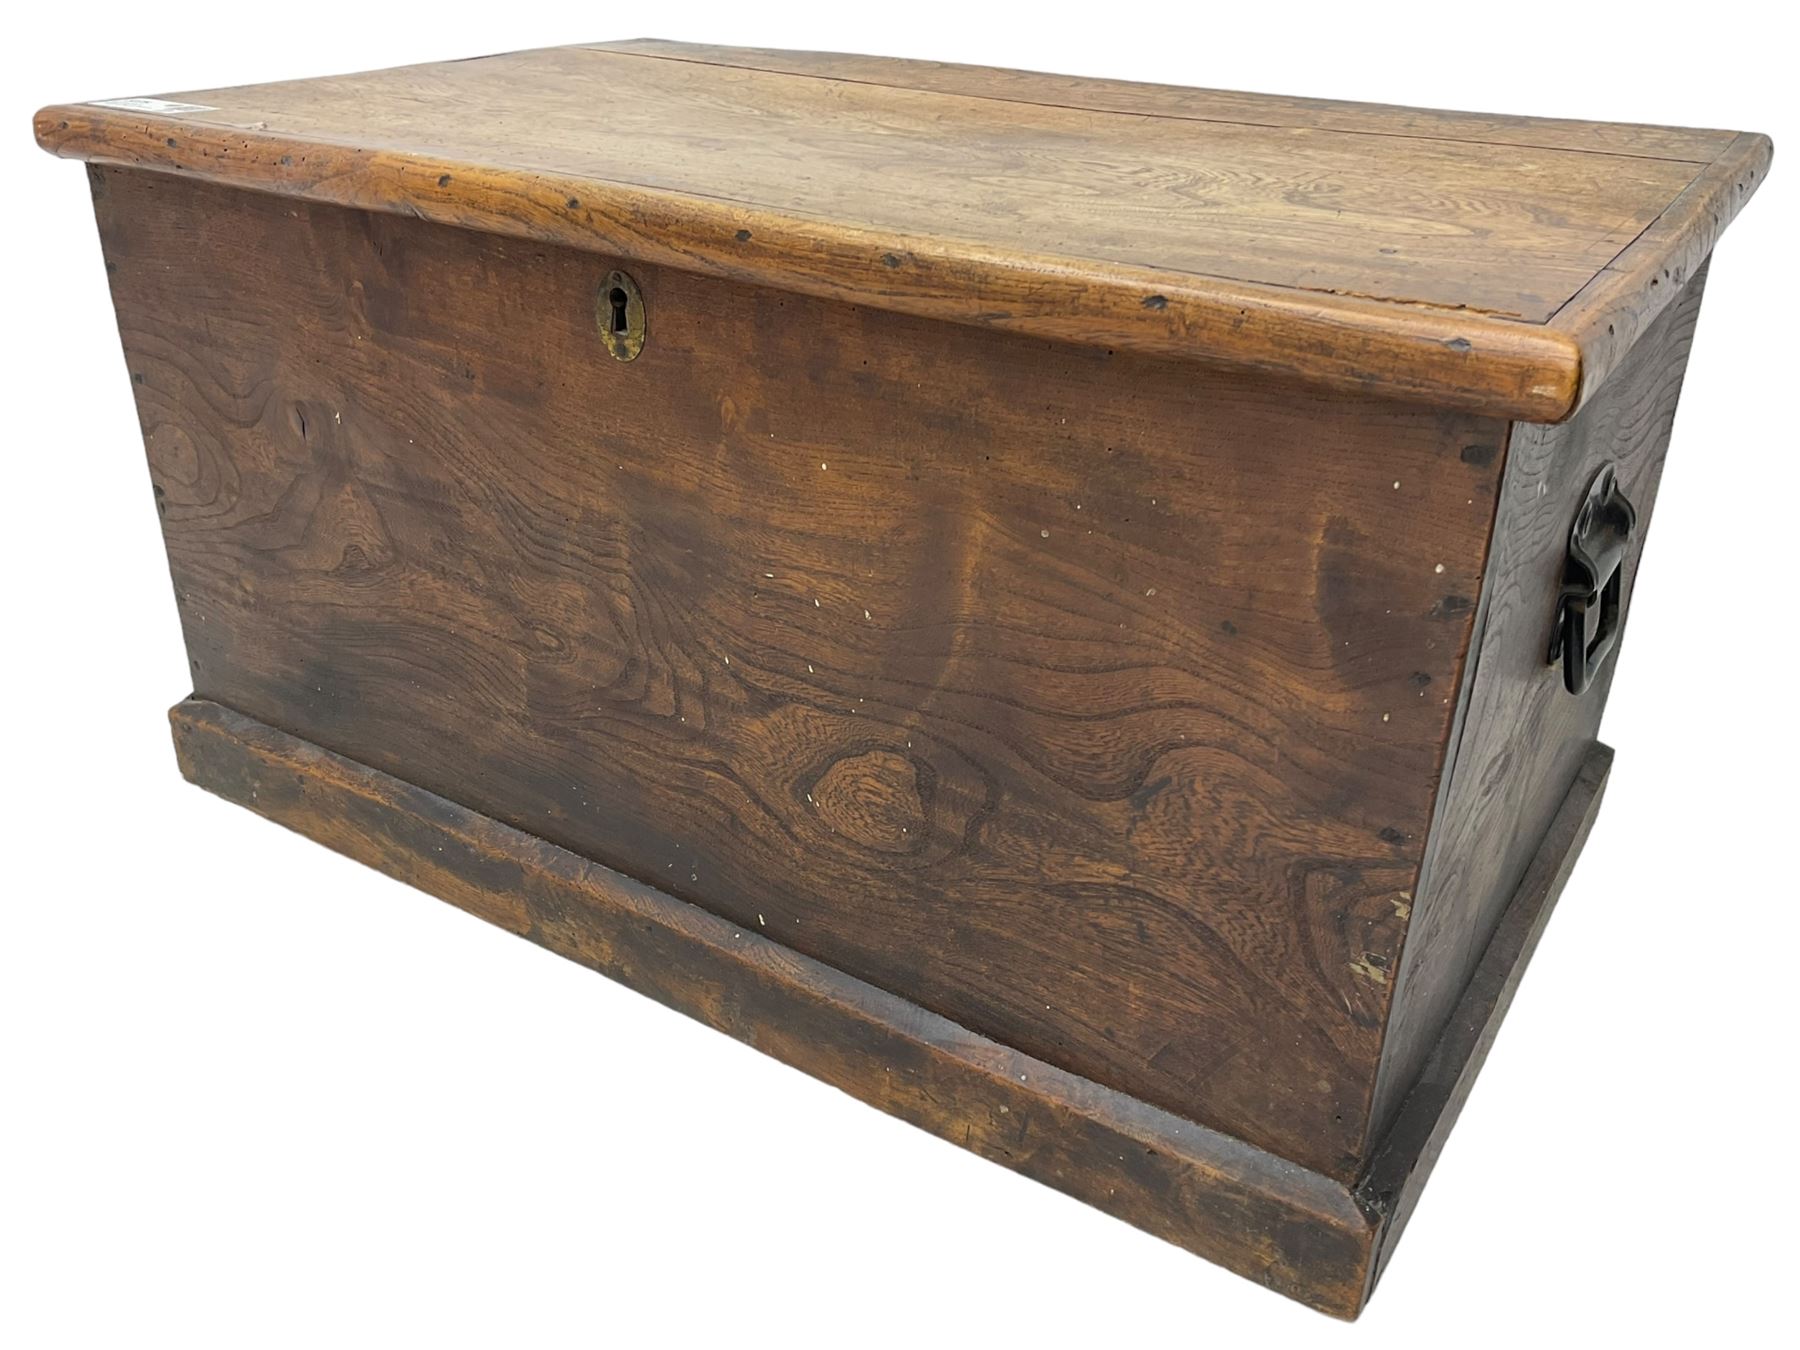 Small 19th century stained elm blanket chest - Image 6 of 7